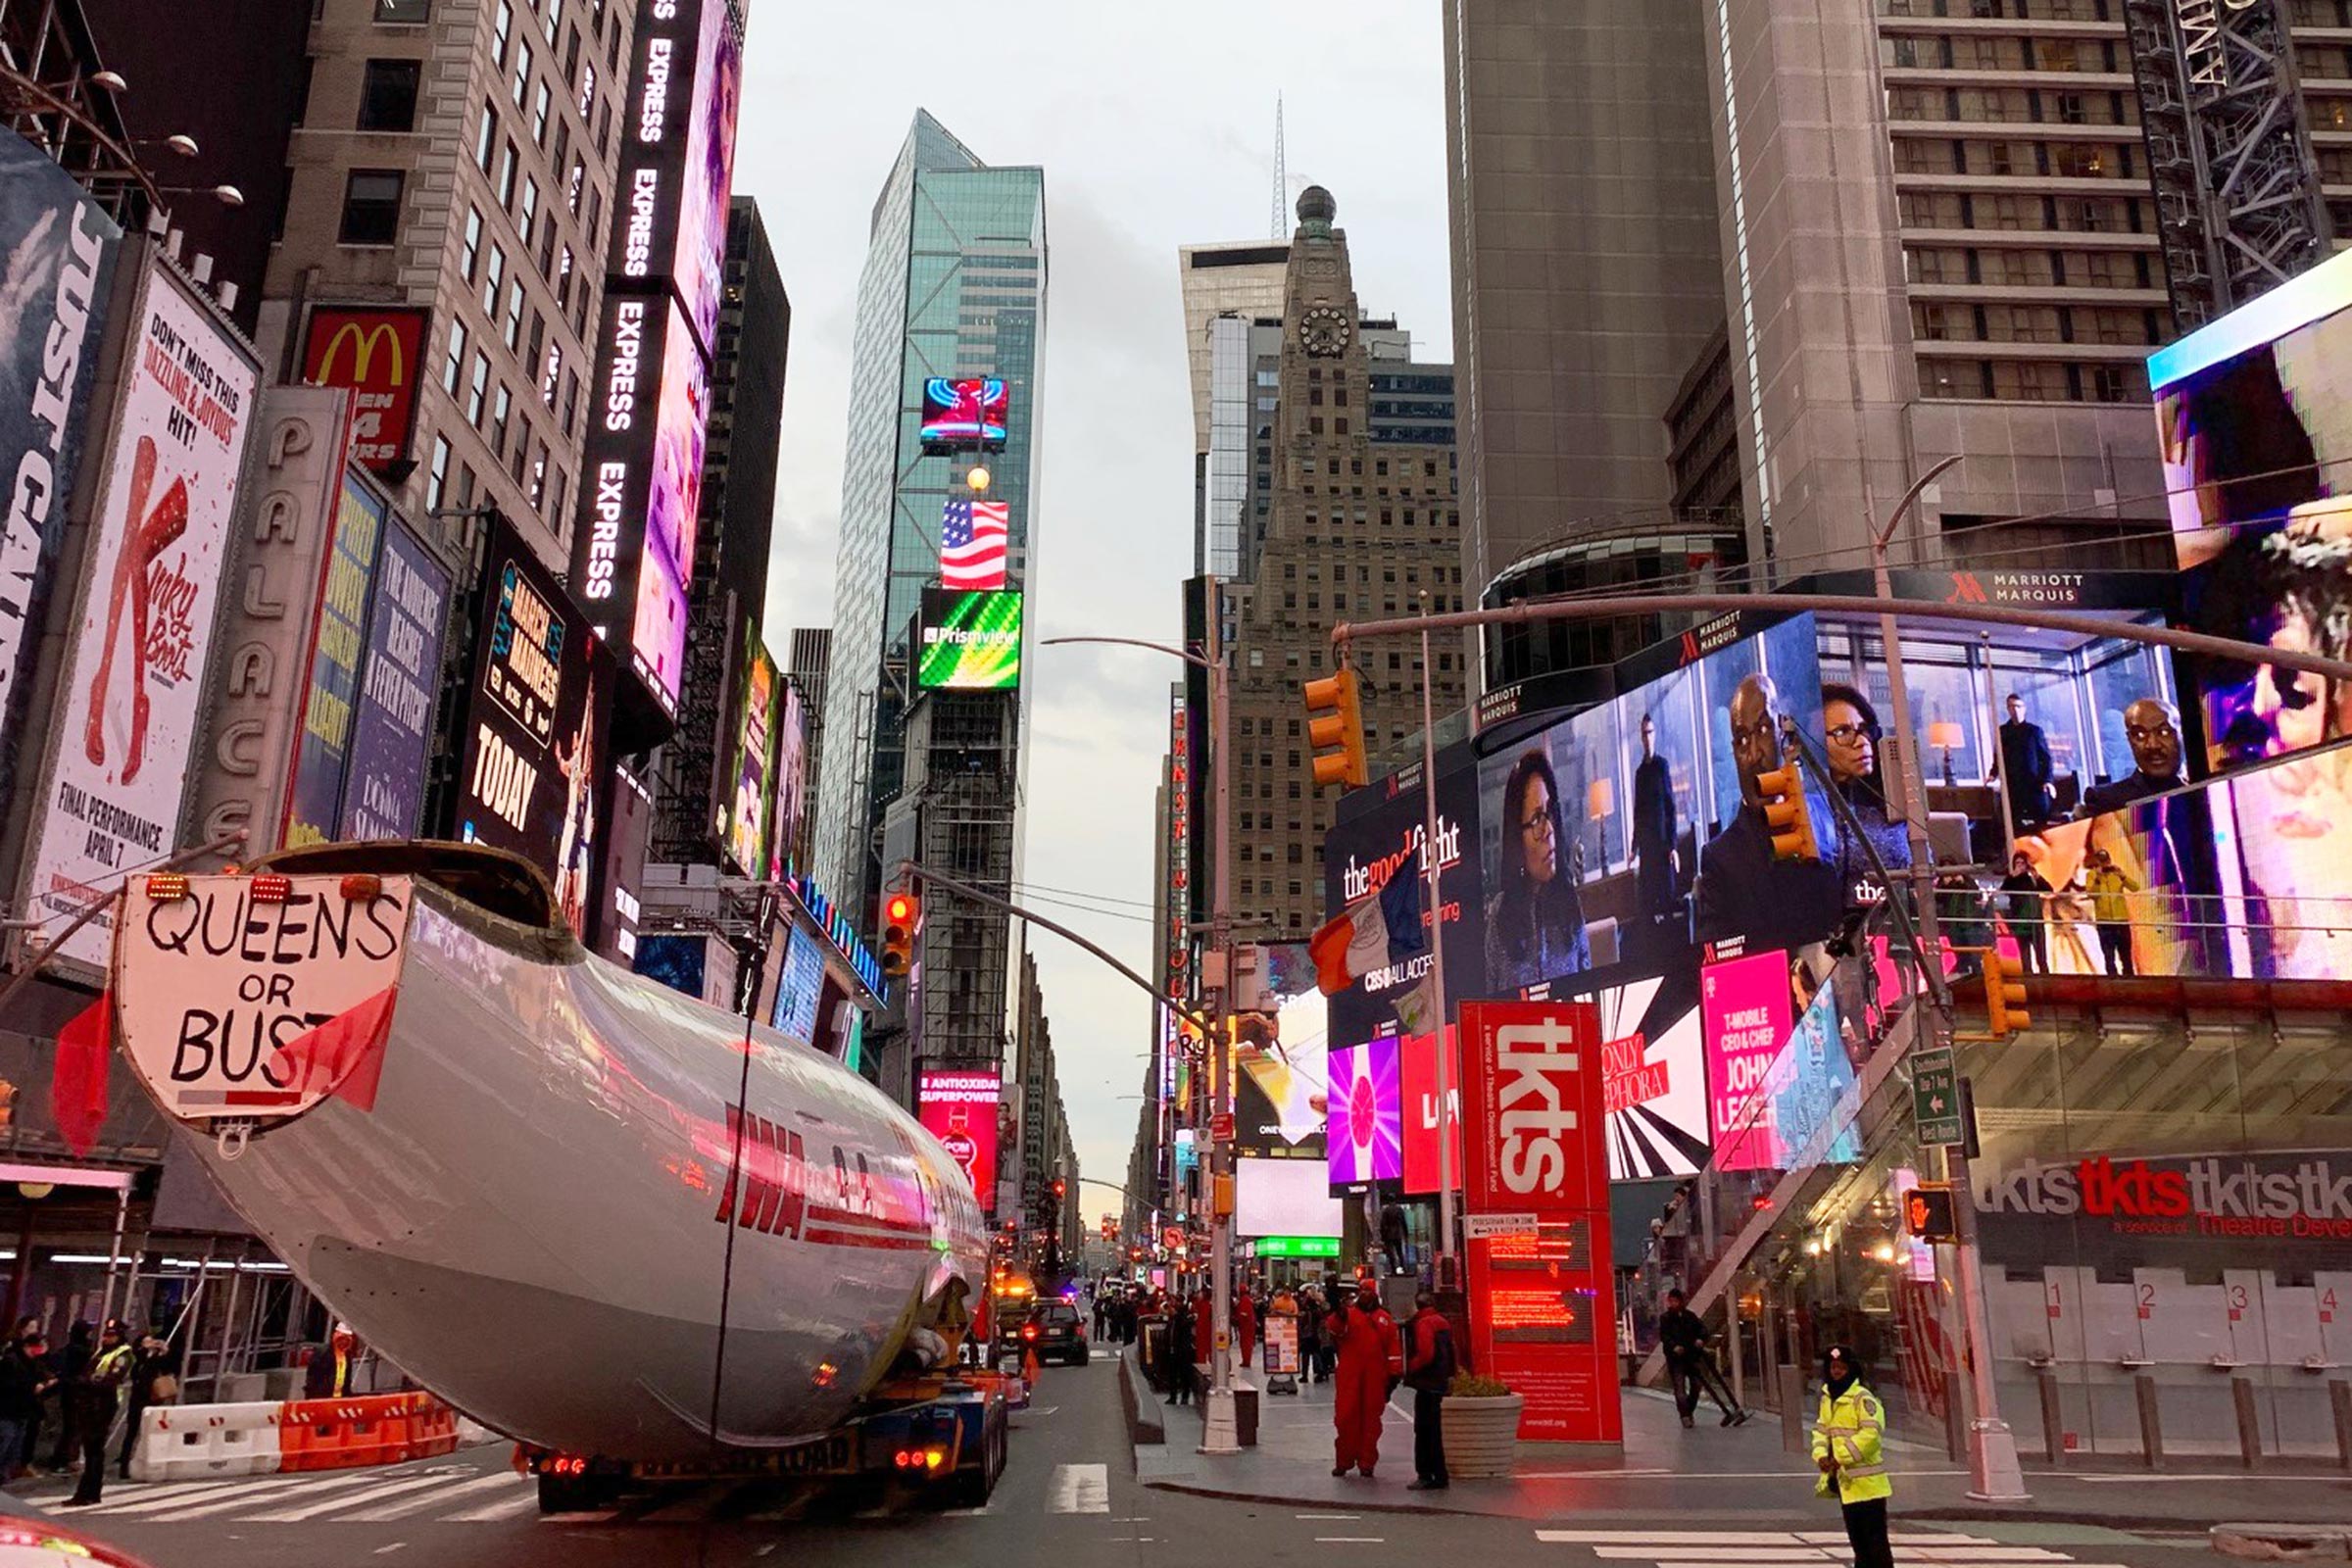 Connie’s 220-foot-long billboard lit up Times Square for five minutes on March 23, 2019.